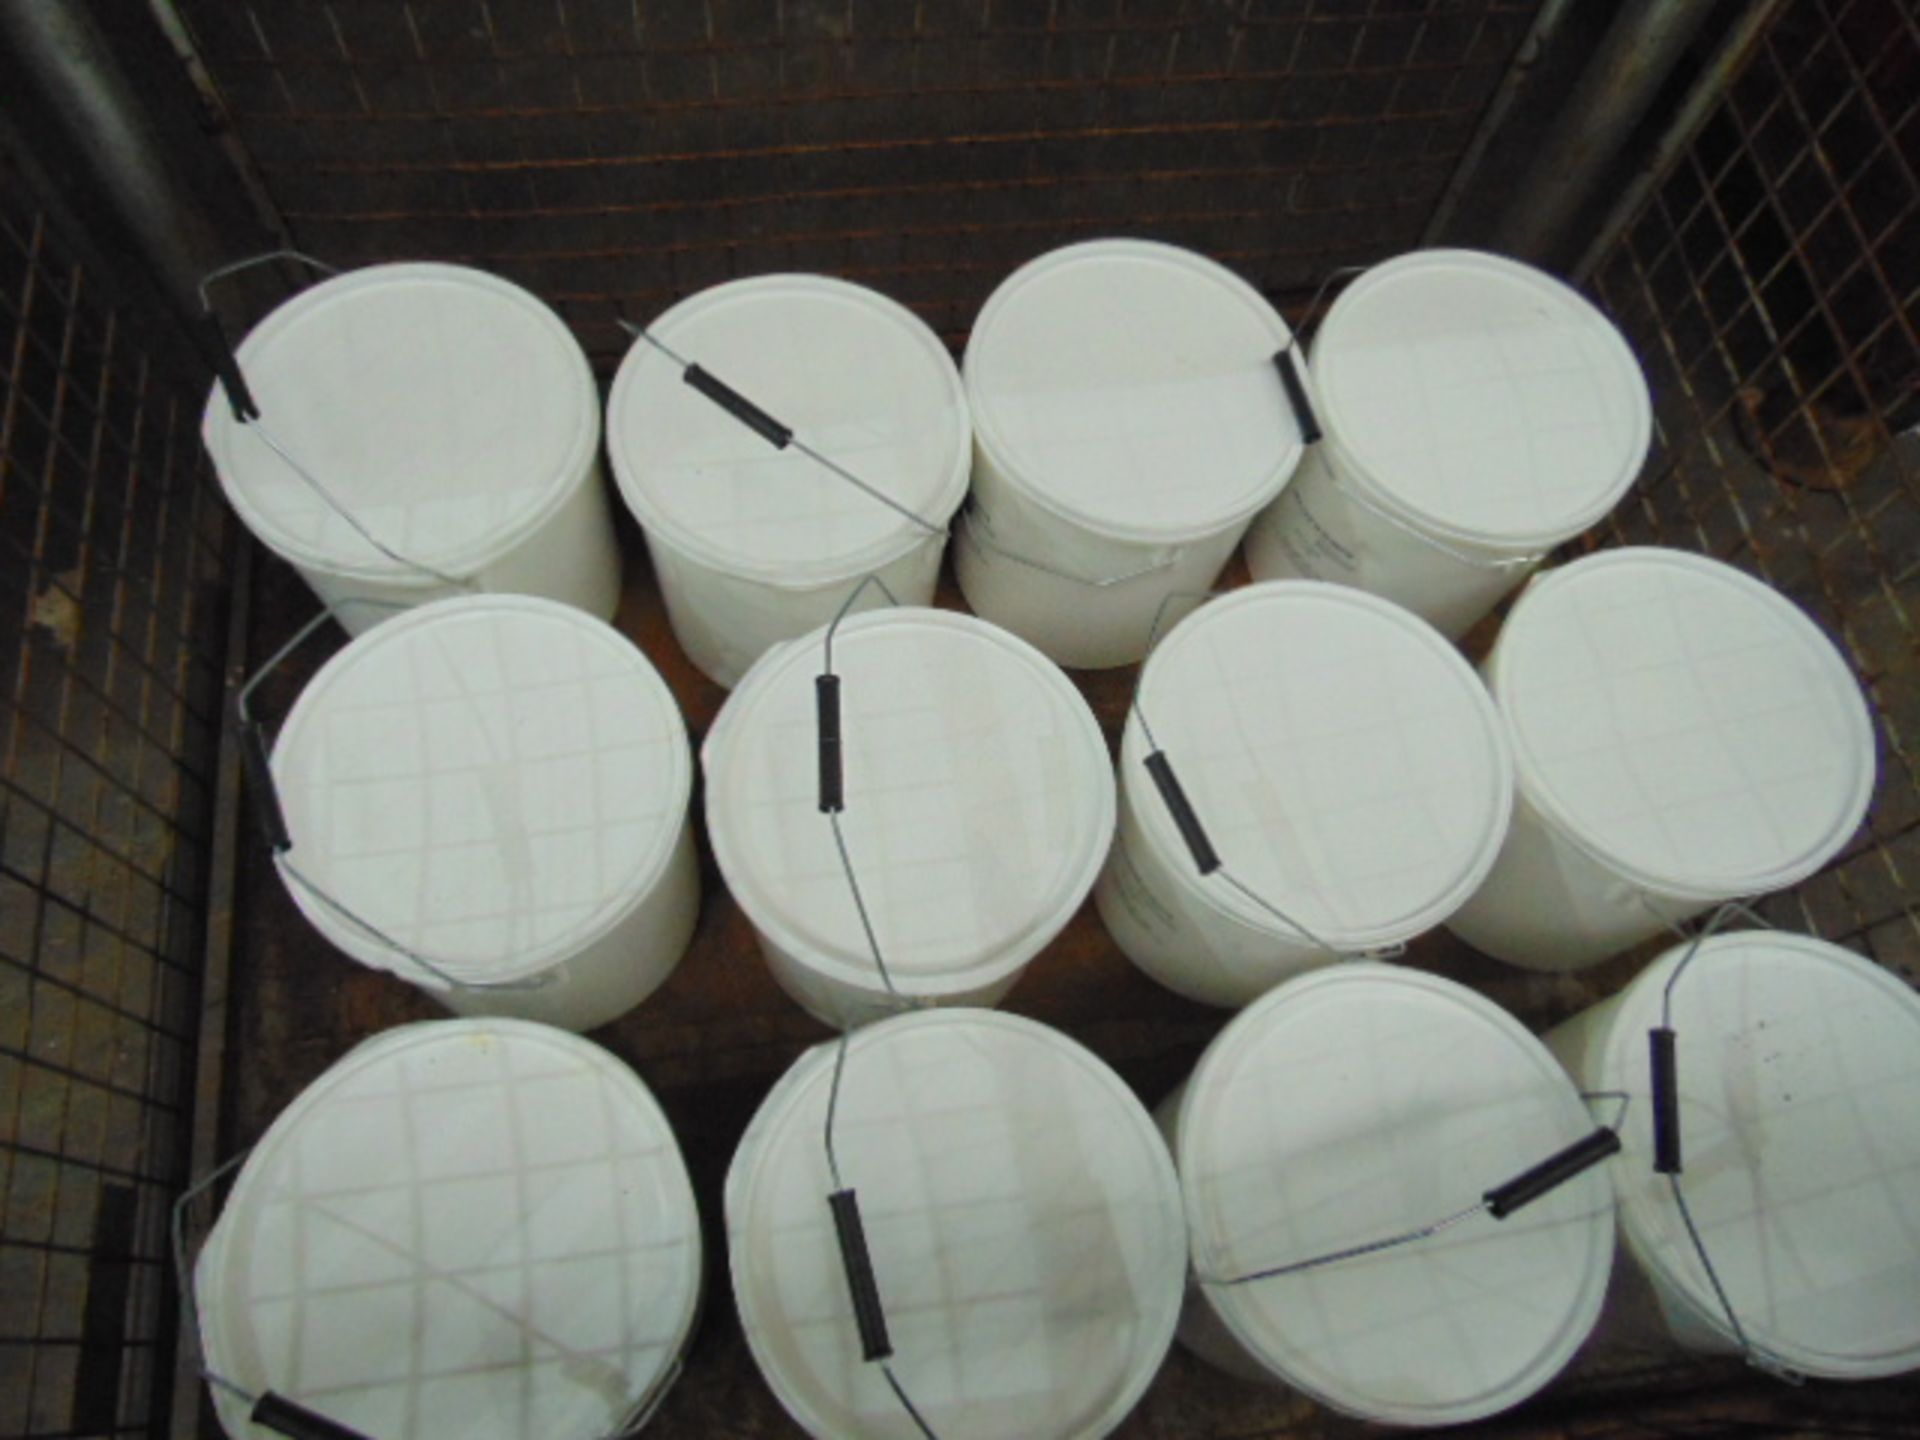 12 x Unissued 10L Tubs of Sealfas 30-36 Coating